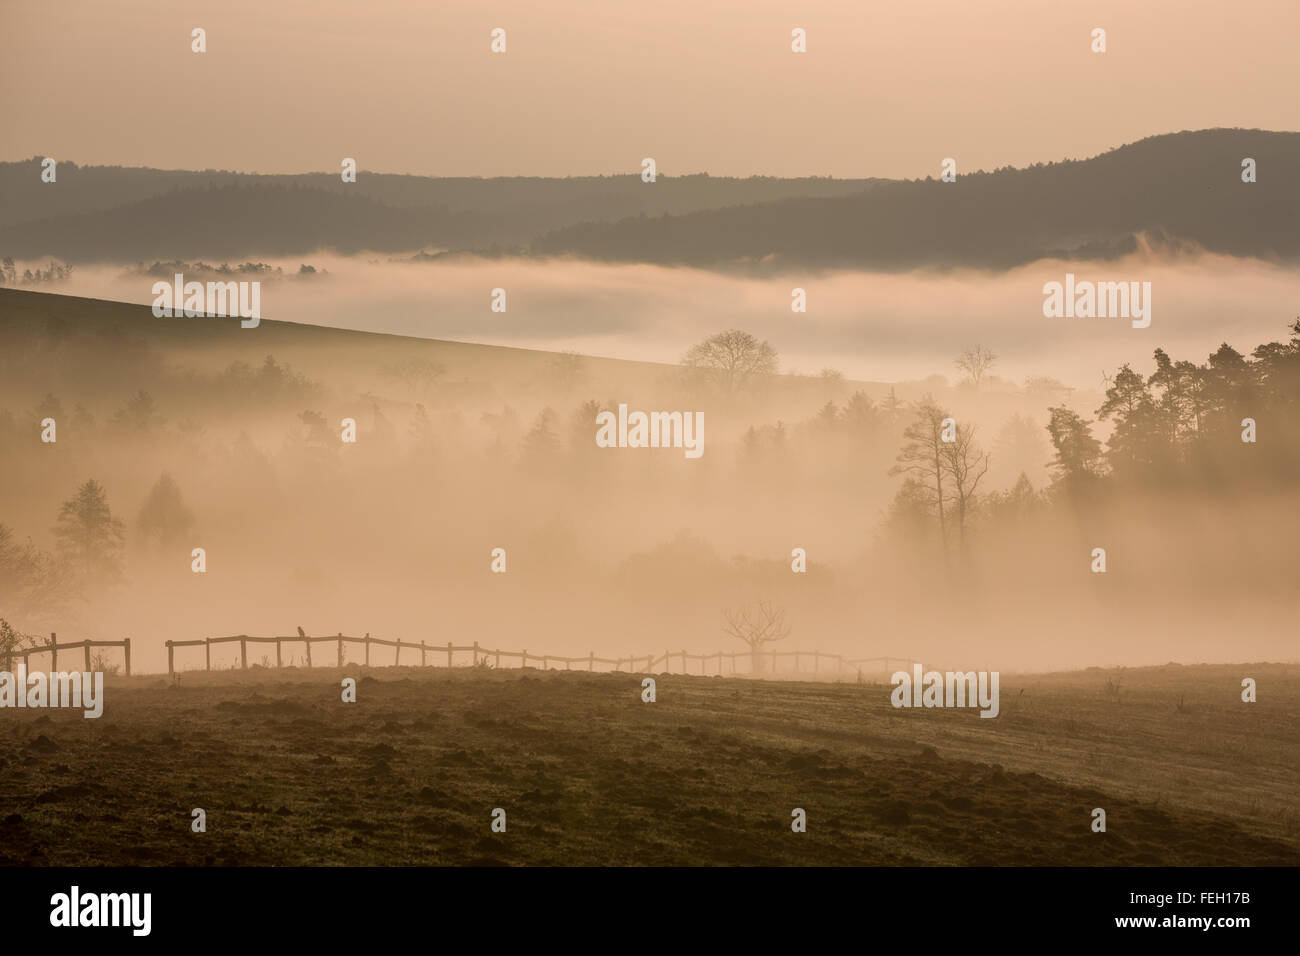 Foggy hills and valleys with fence in autumn dawn Stock Photo